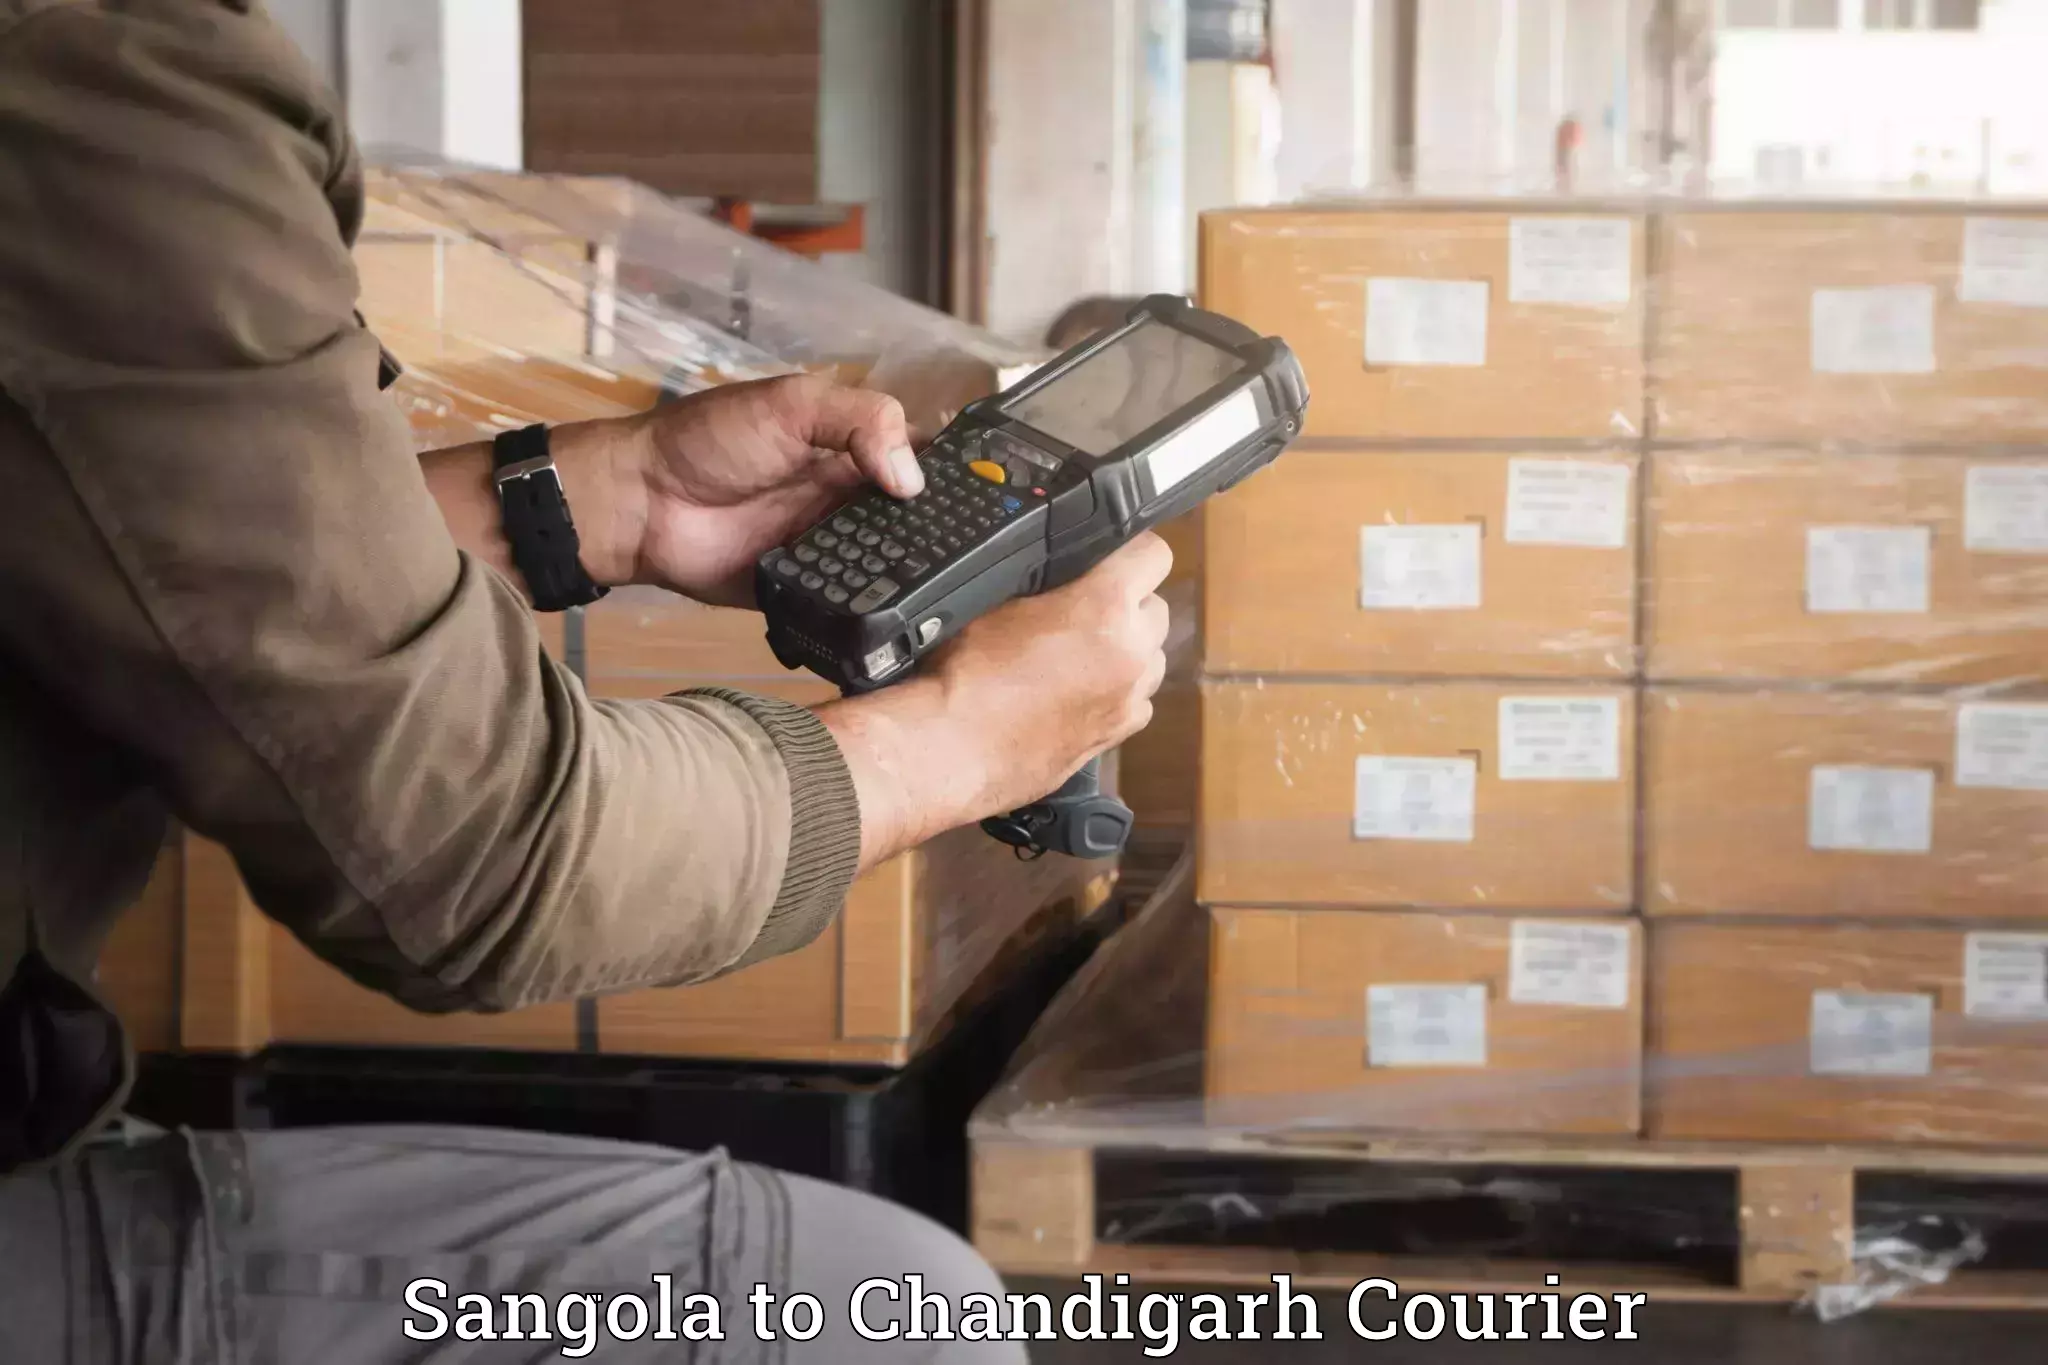 Luggage delivery app Sangola to Chandigarh